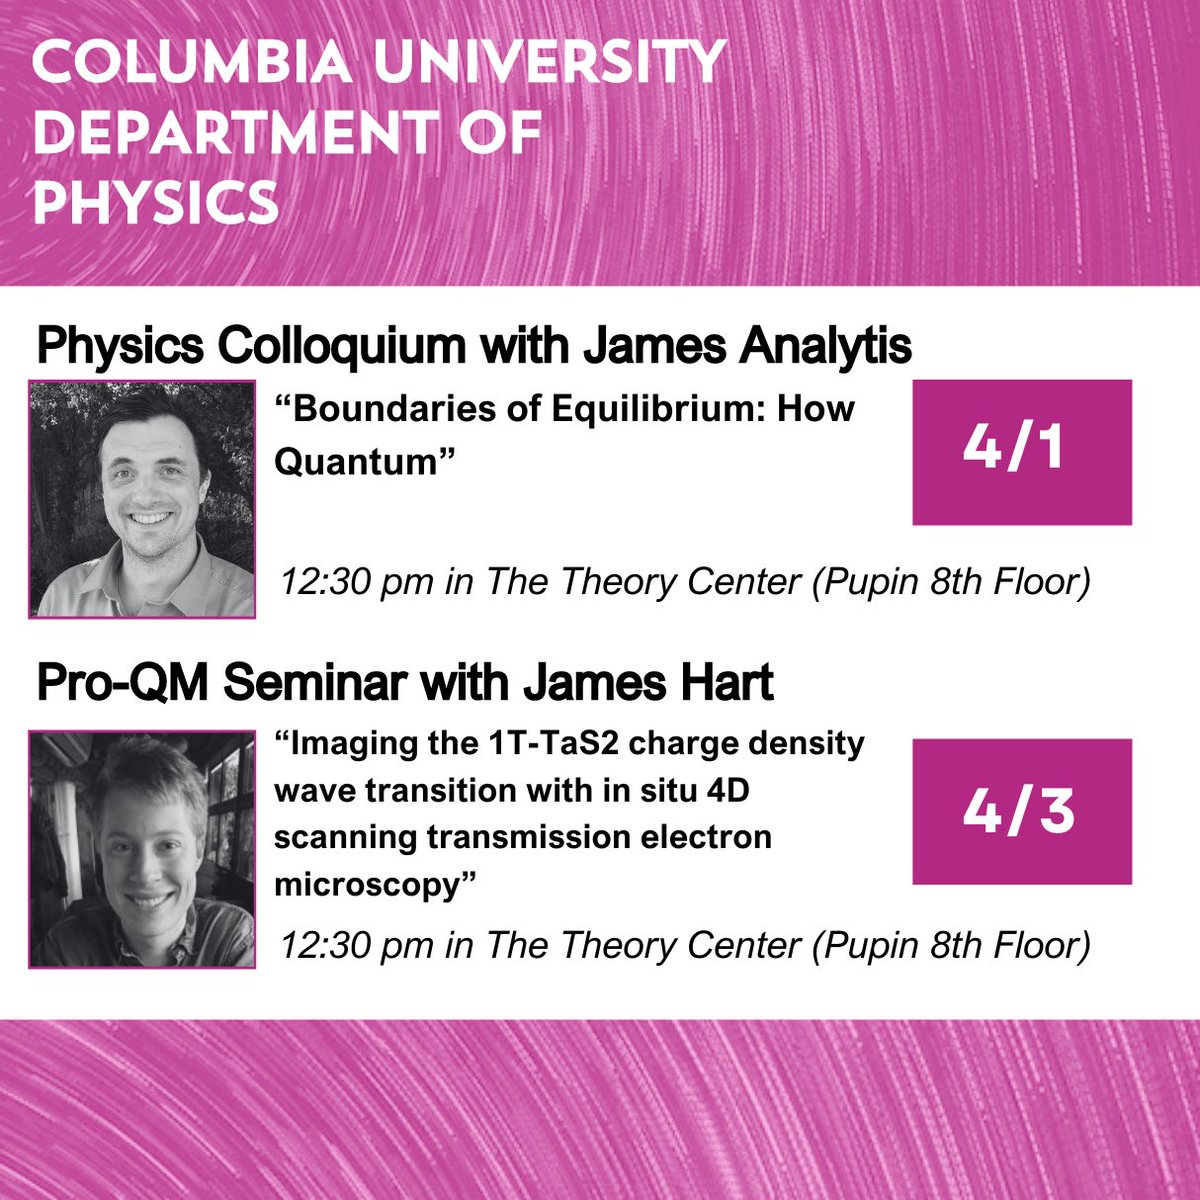 Coming up next week, we will have two exciting talks from James Analytis and James Hart! We hope to see you all there!